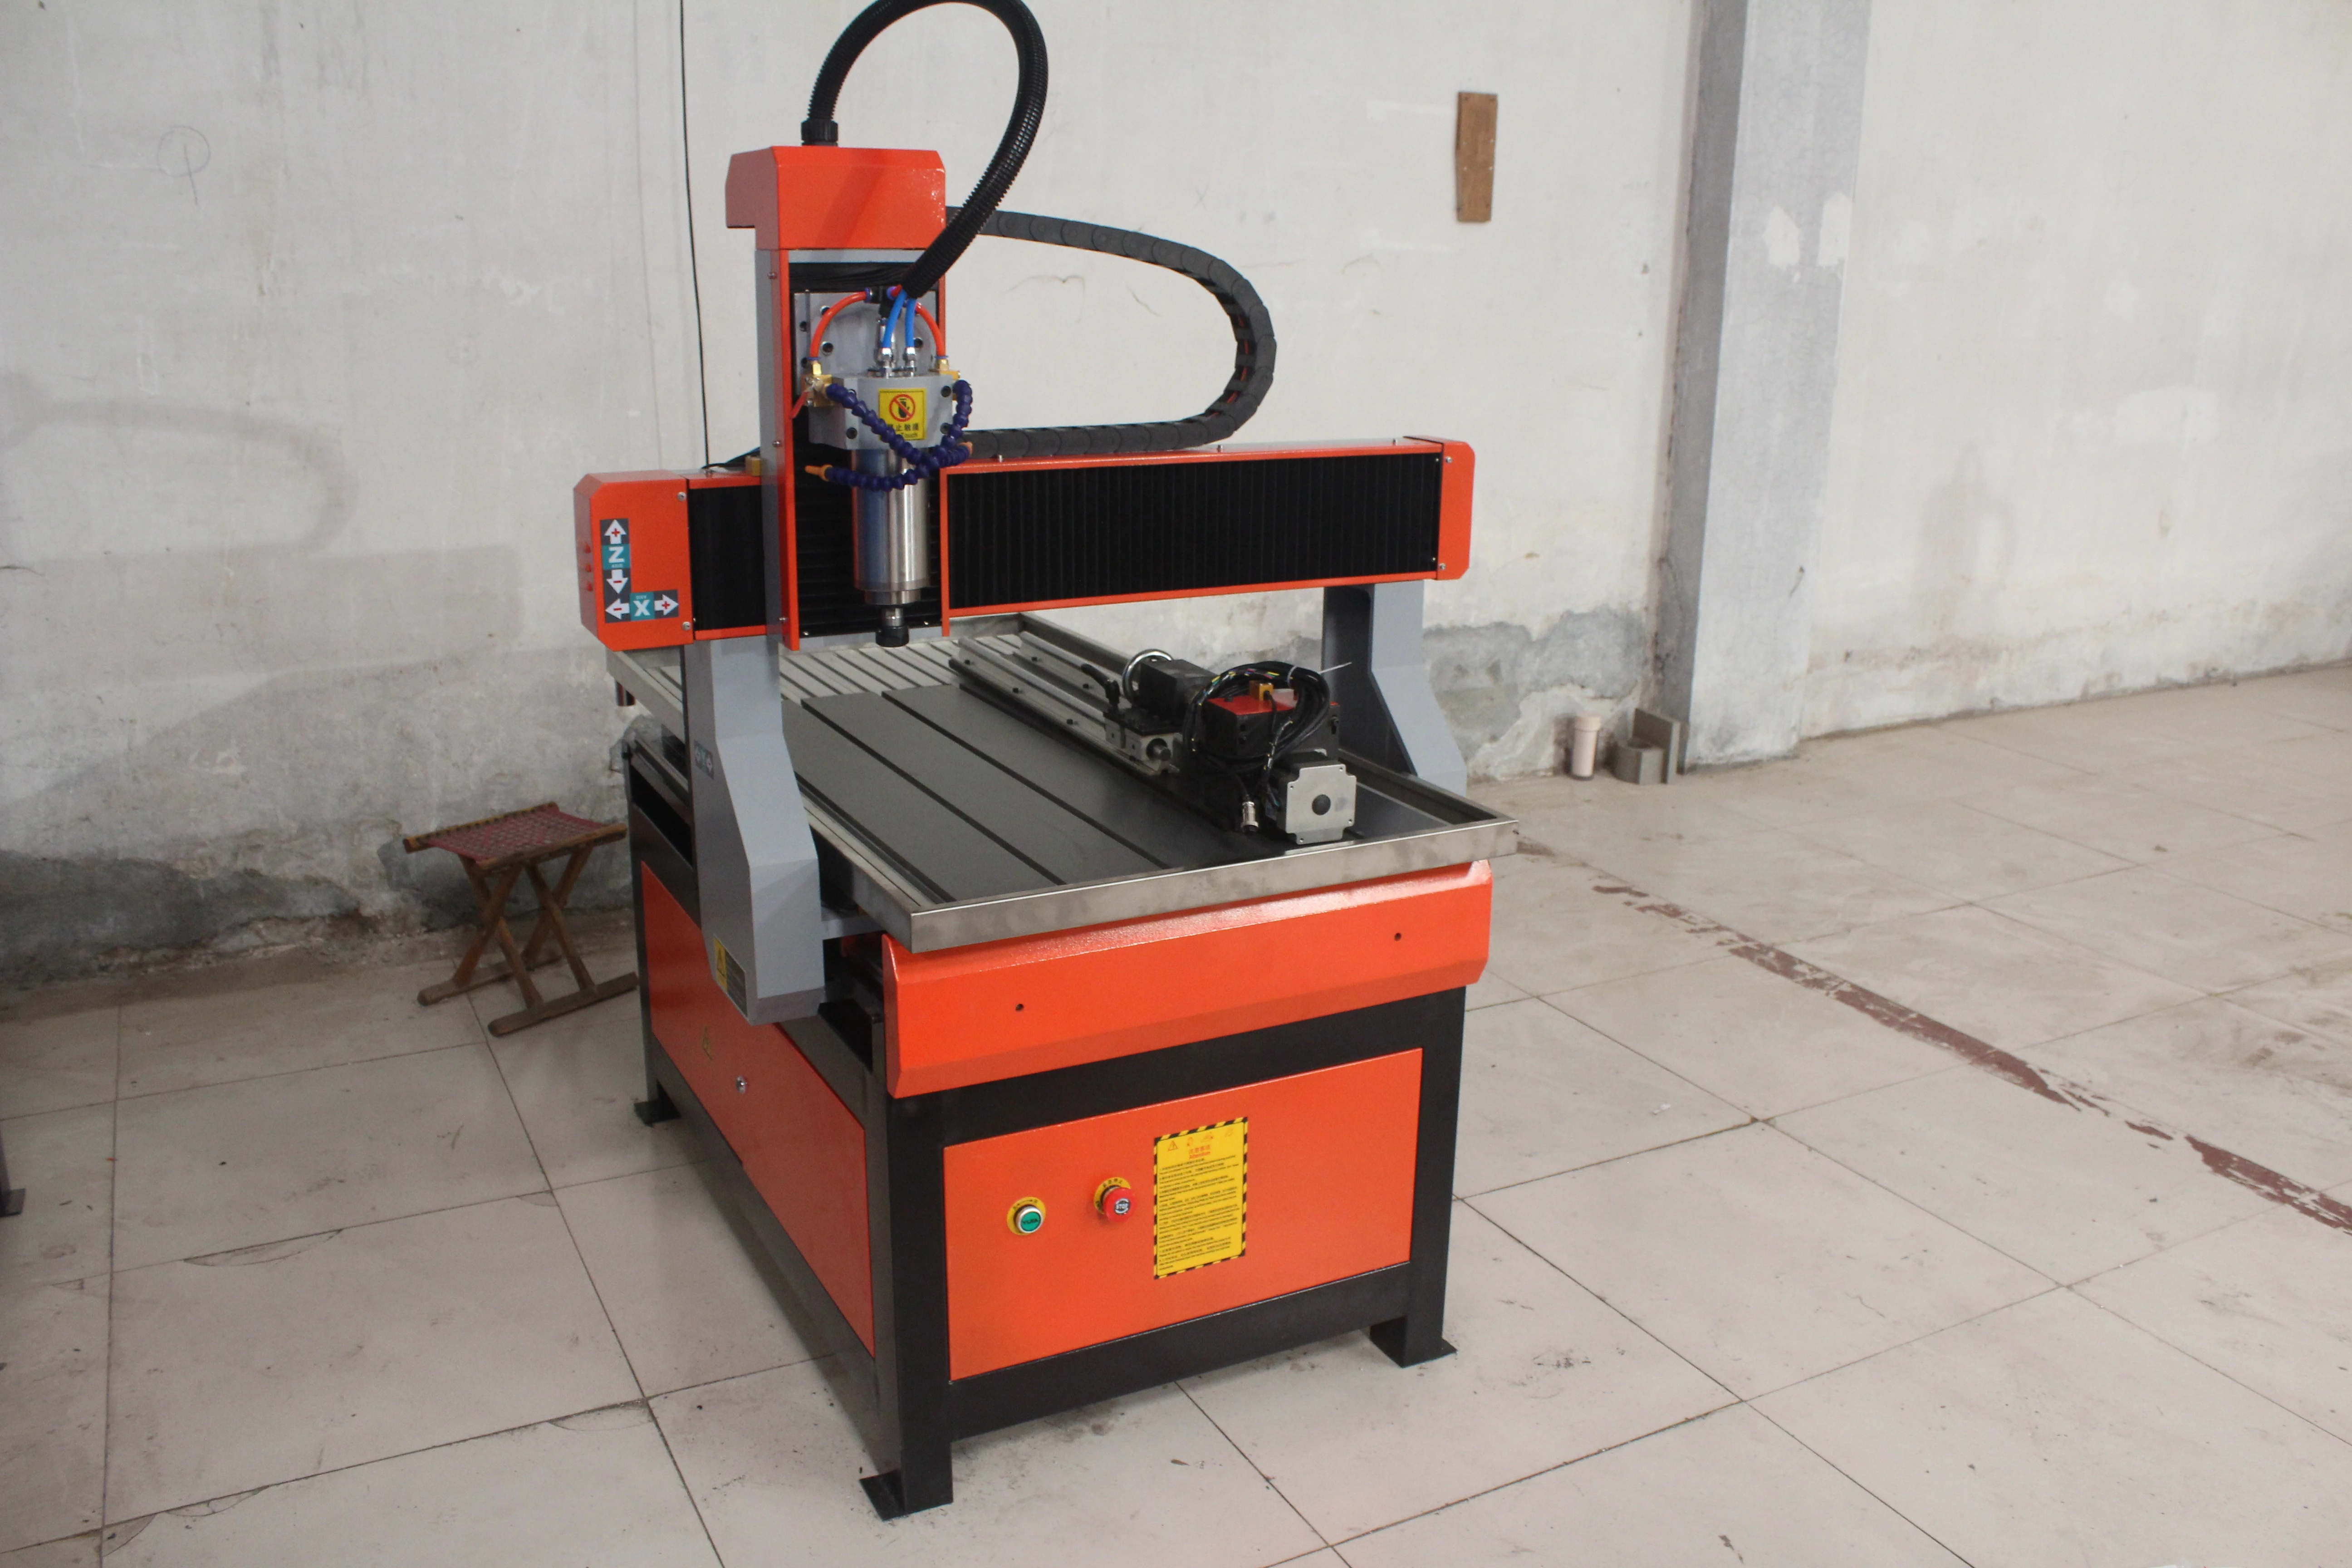 welcome in handle craft industry mini cnc 6090 carving machine cnc